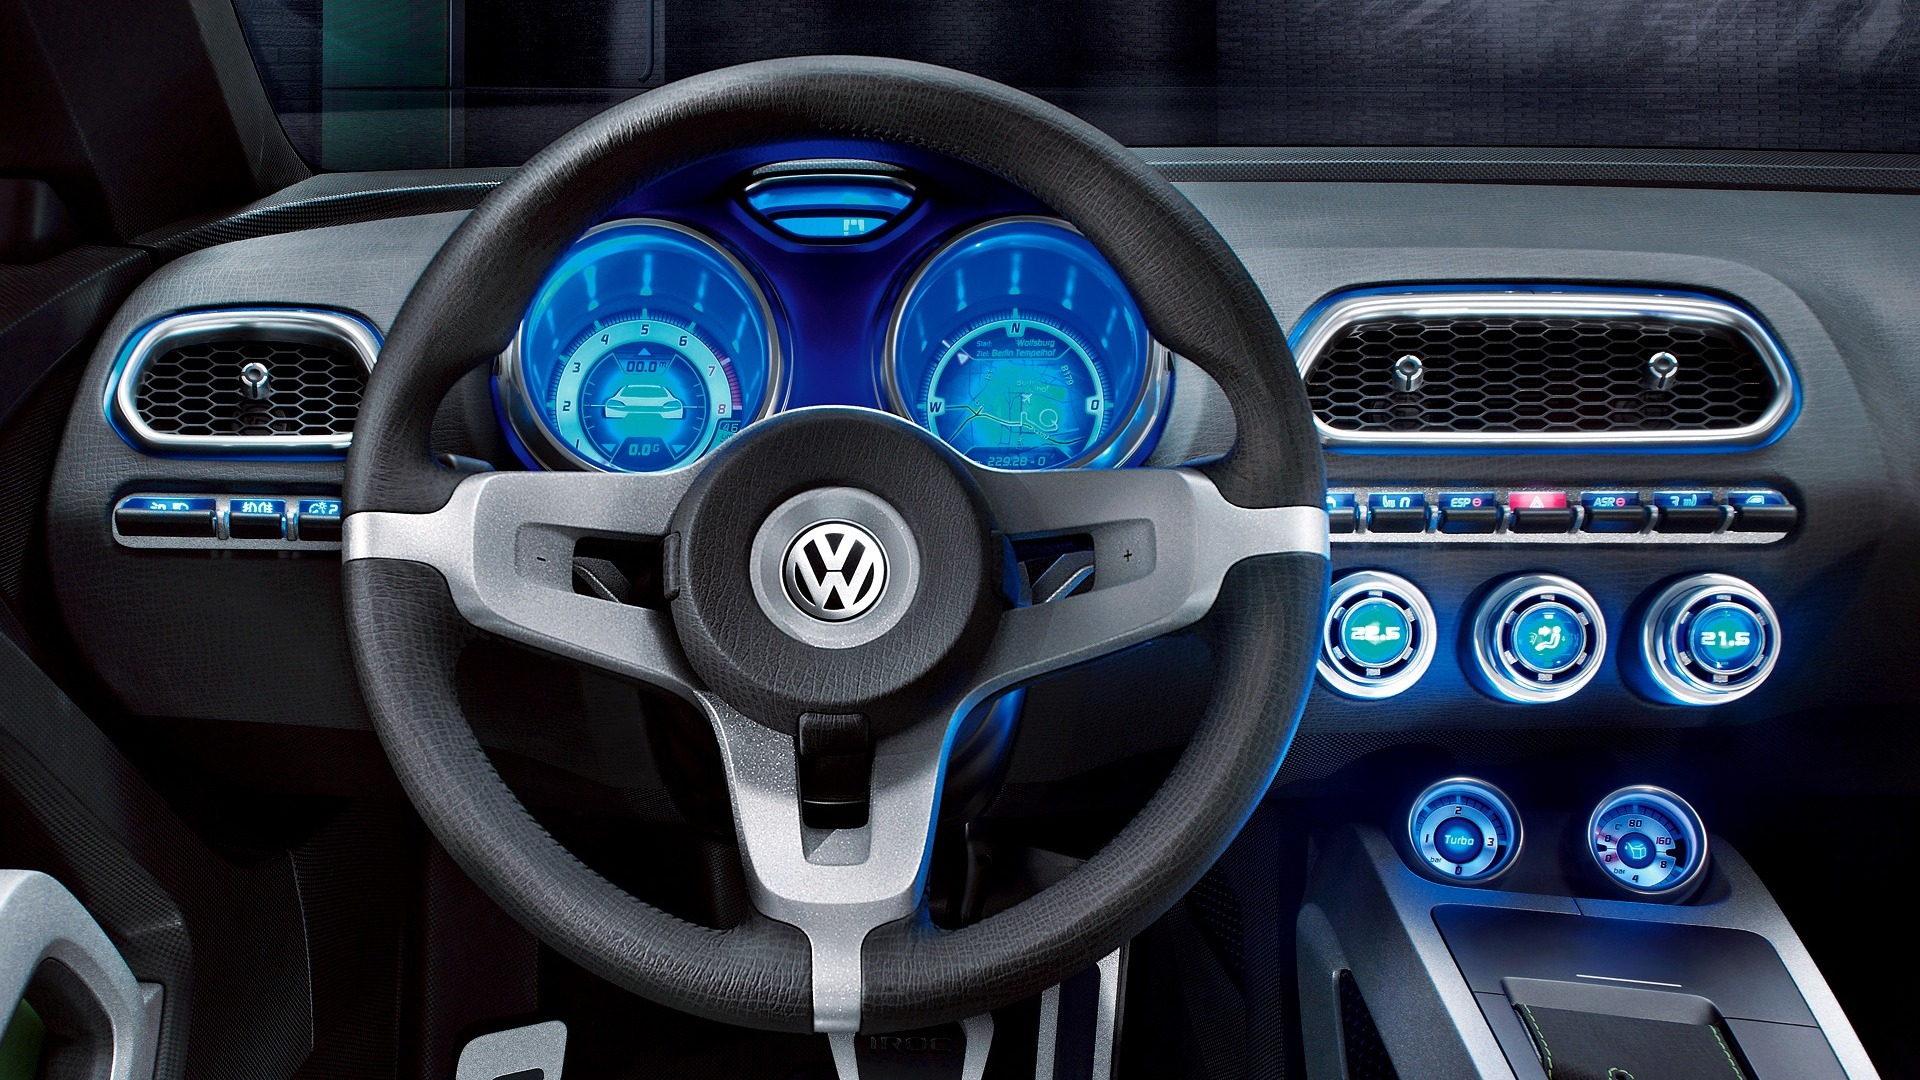 Volkswagen Concept Car tapety (2) #6 - 1920x1080